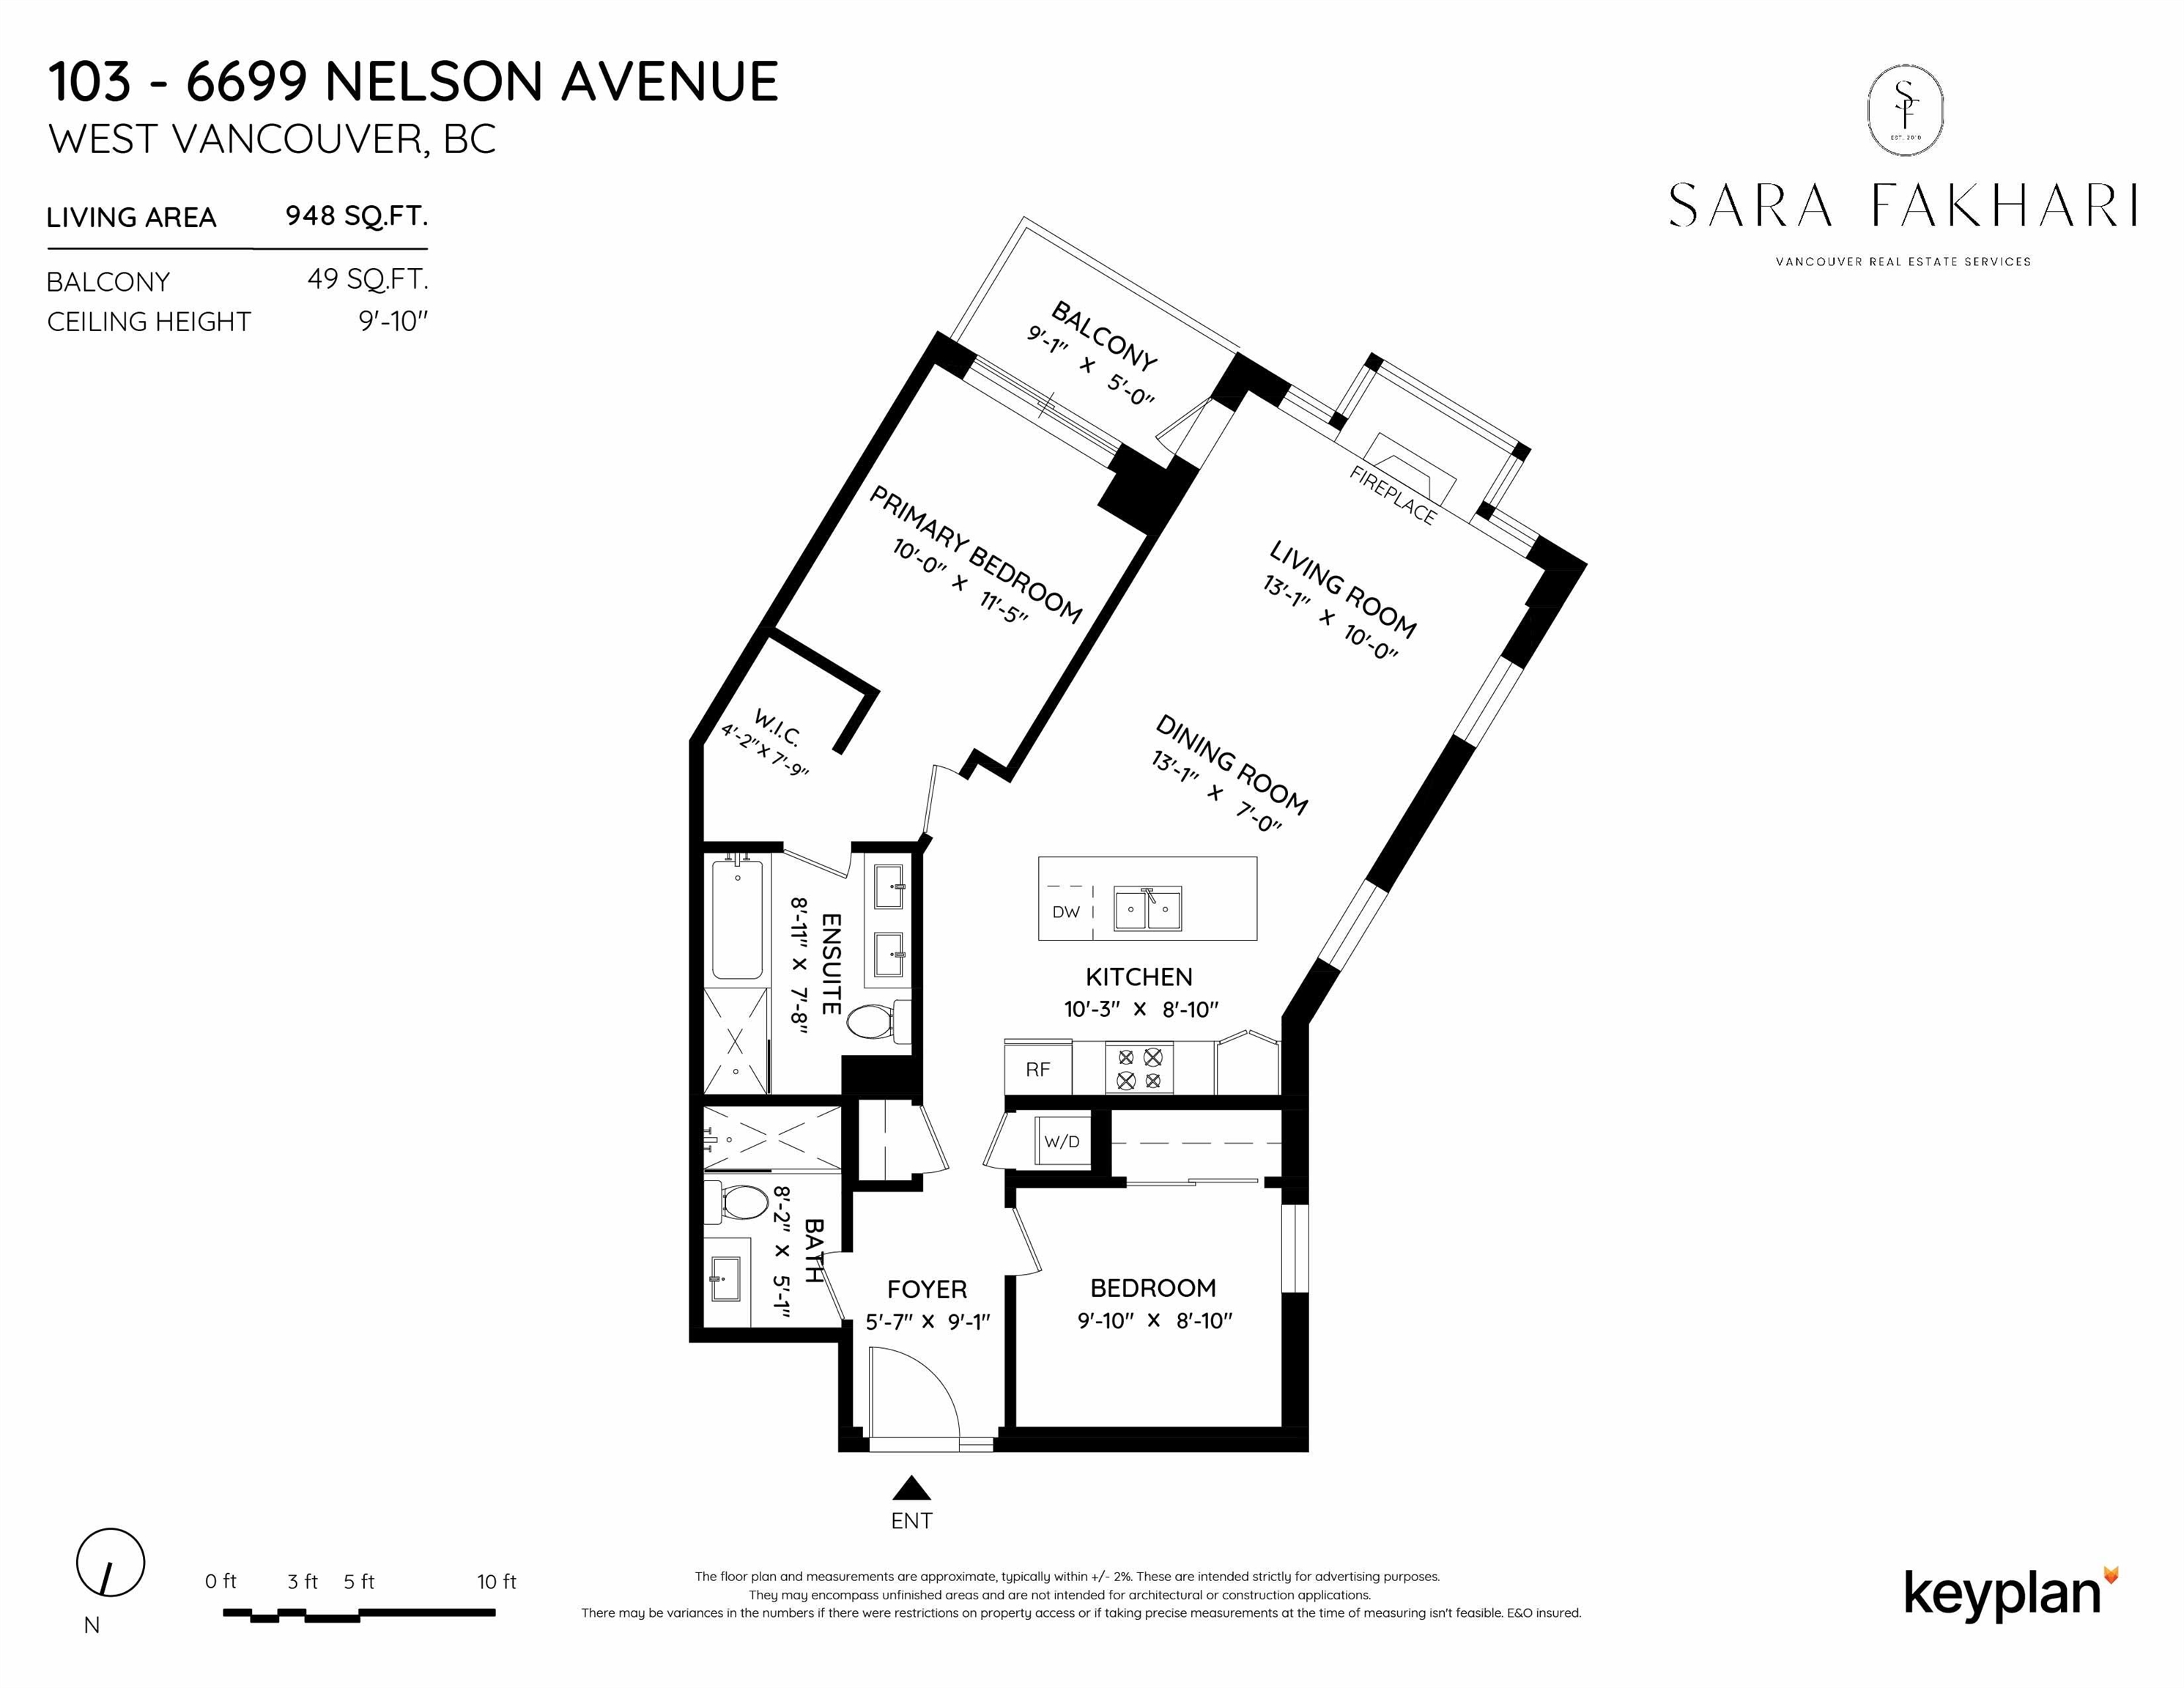 Listing image of 103 6699 NELSON AVENUE